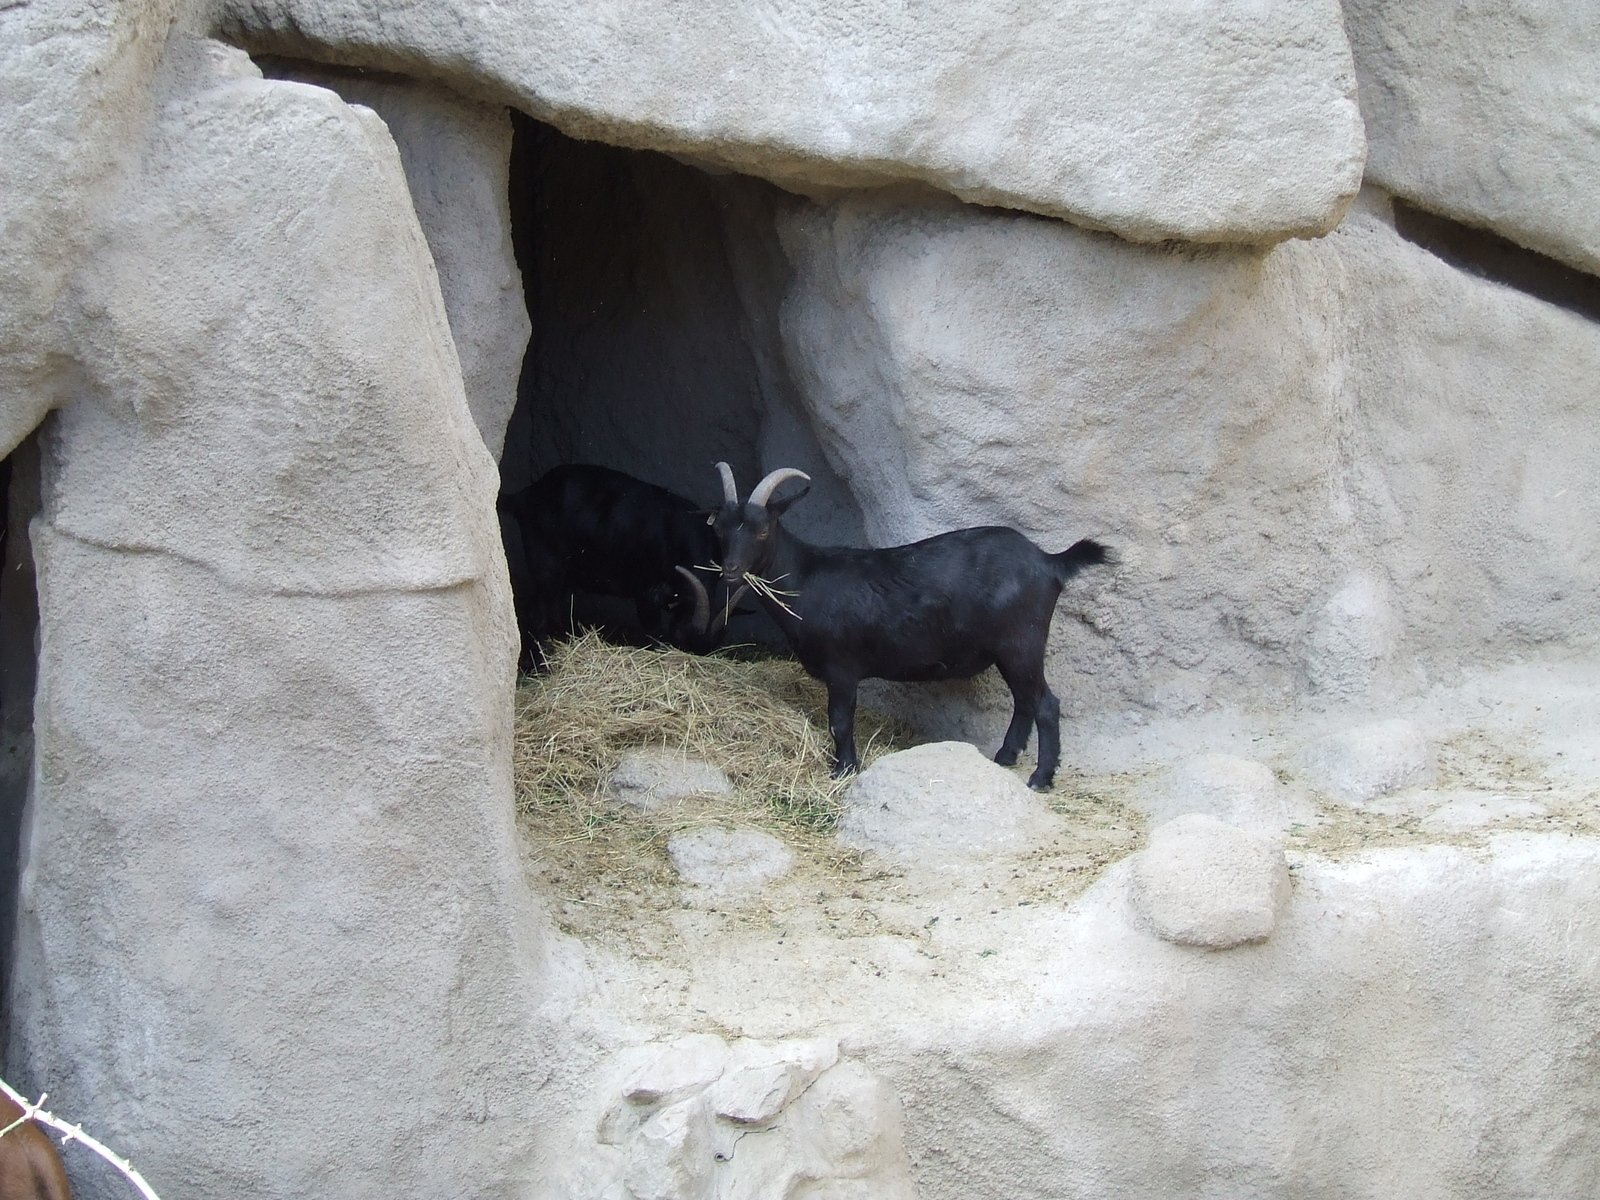 a goat in its natural habitat inside the rocky caves